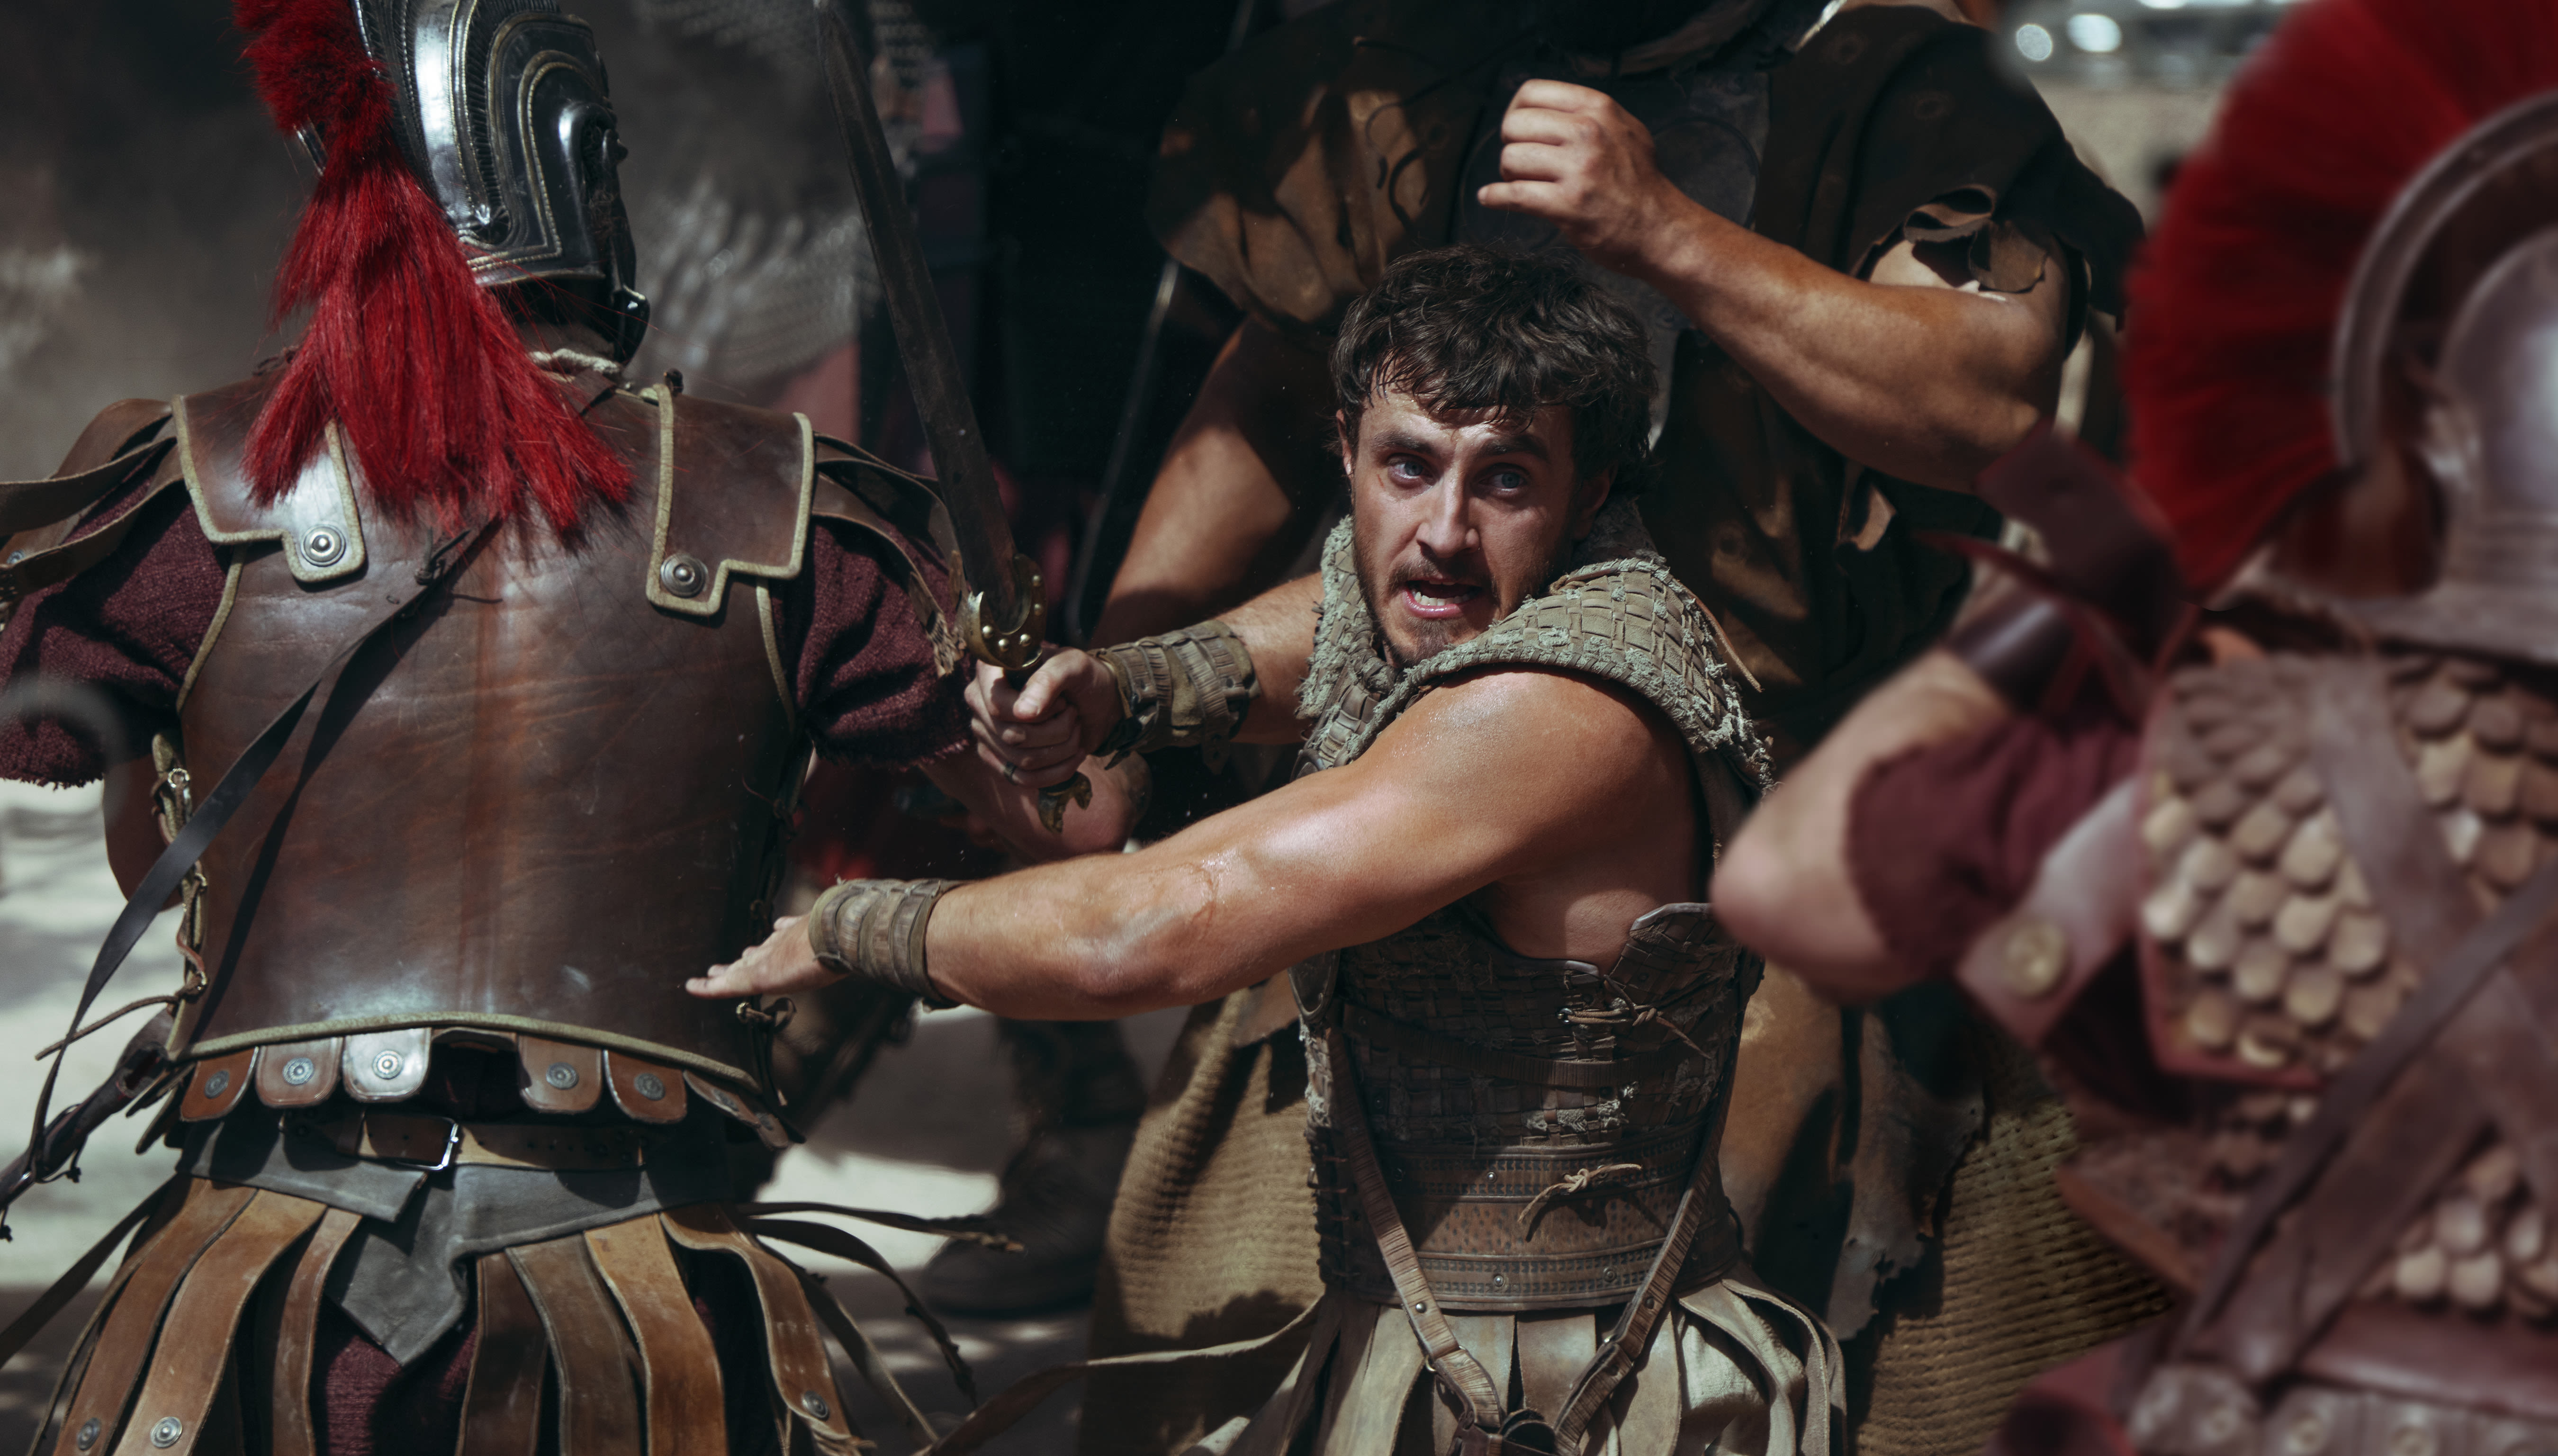 ‘Gladiator 2’ Has the ‘Biggest Action Sequence I’ve Ever Done,’ Says Ridley Scott